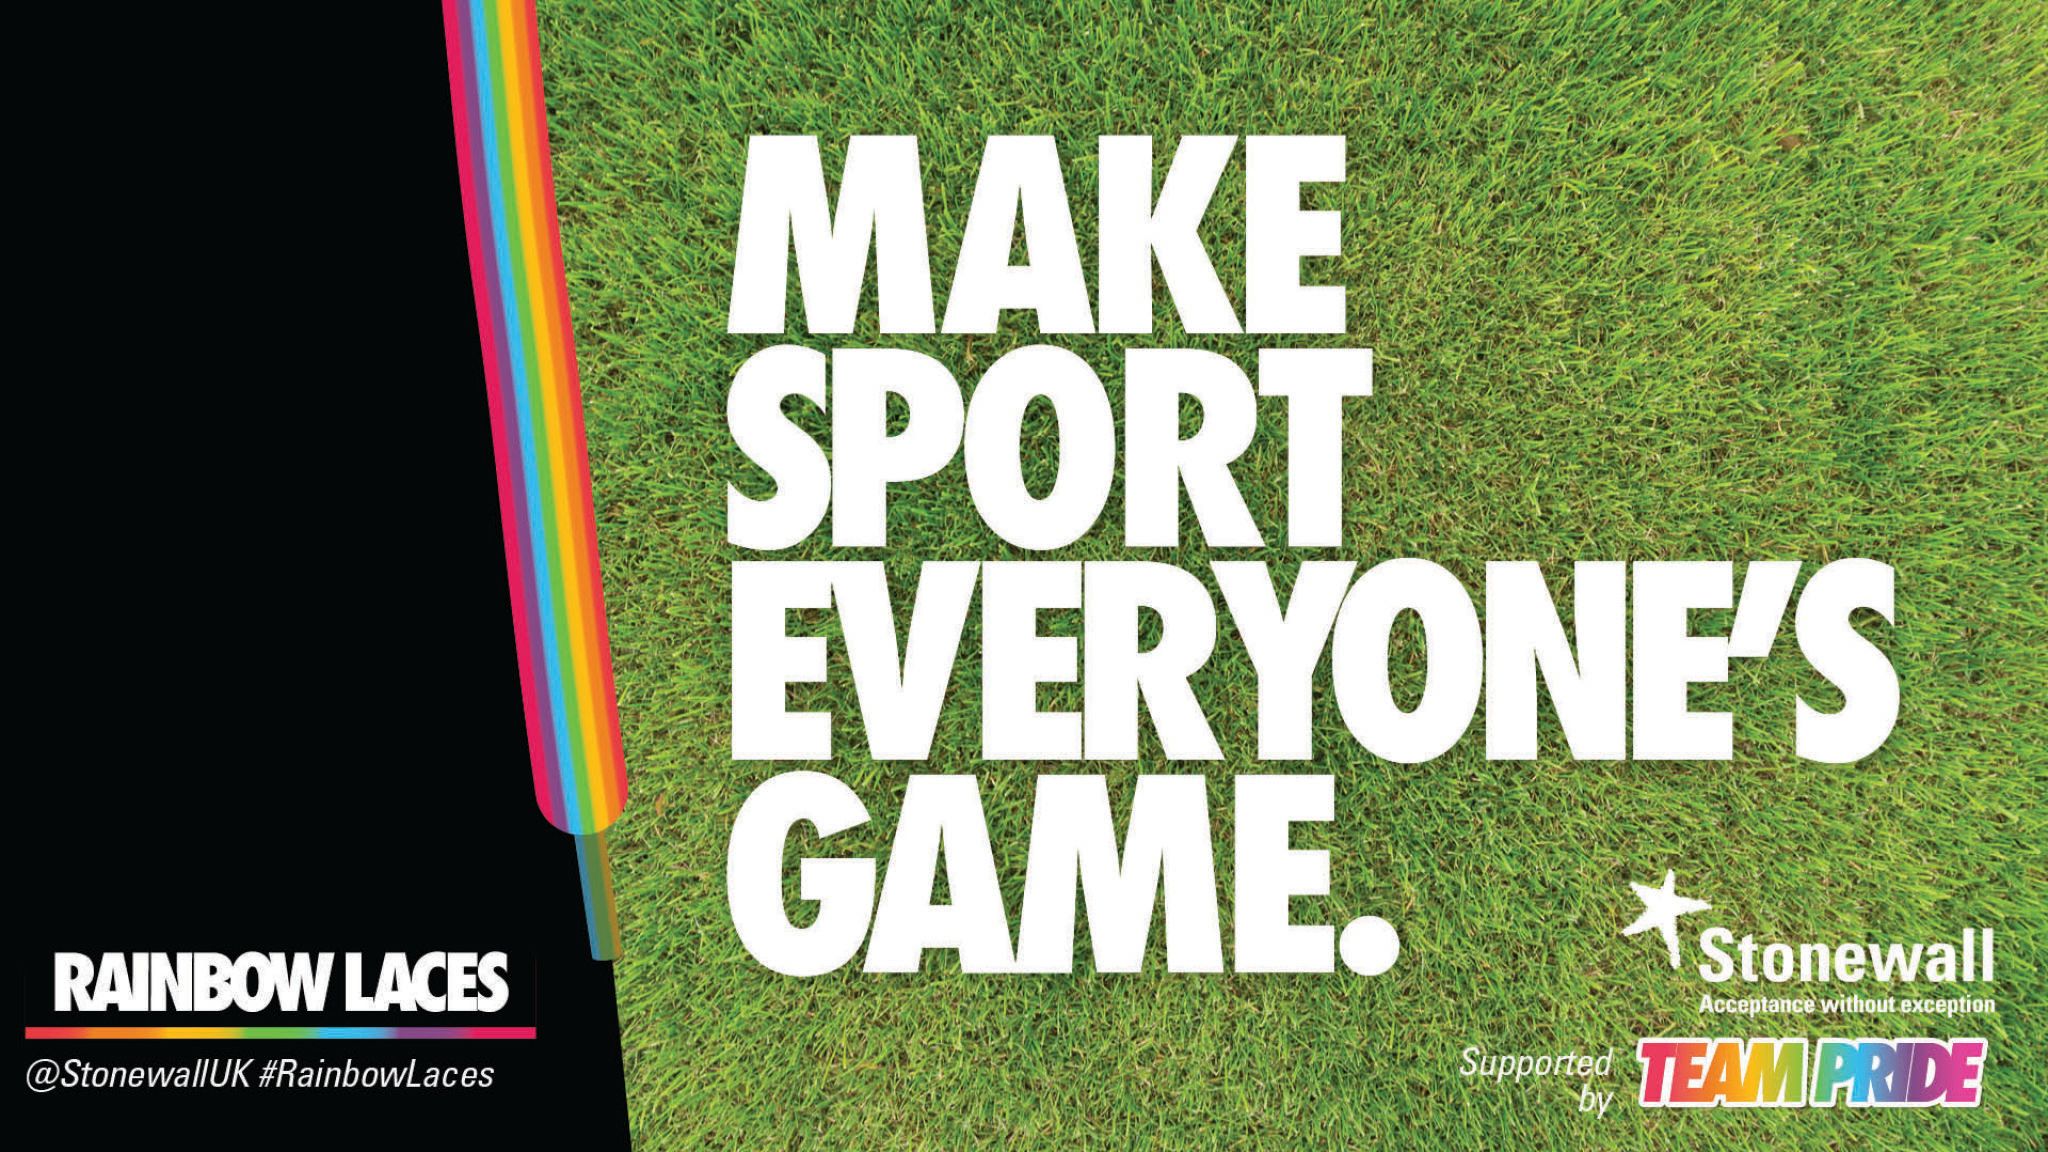 Millwall Community Trust Support Rainbow Laces Campaign